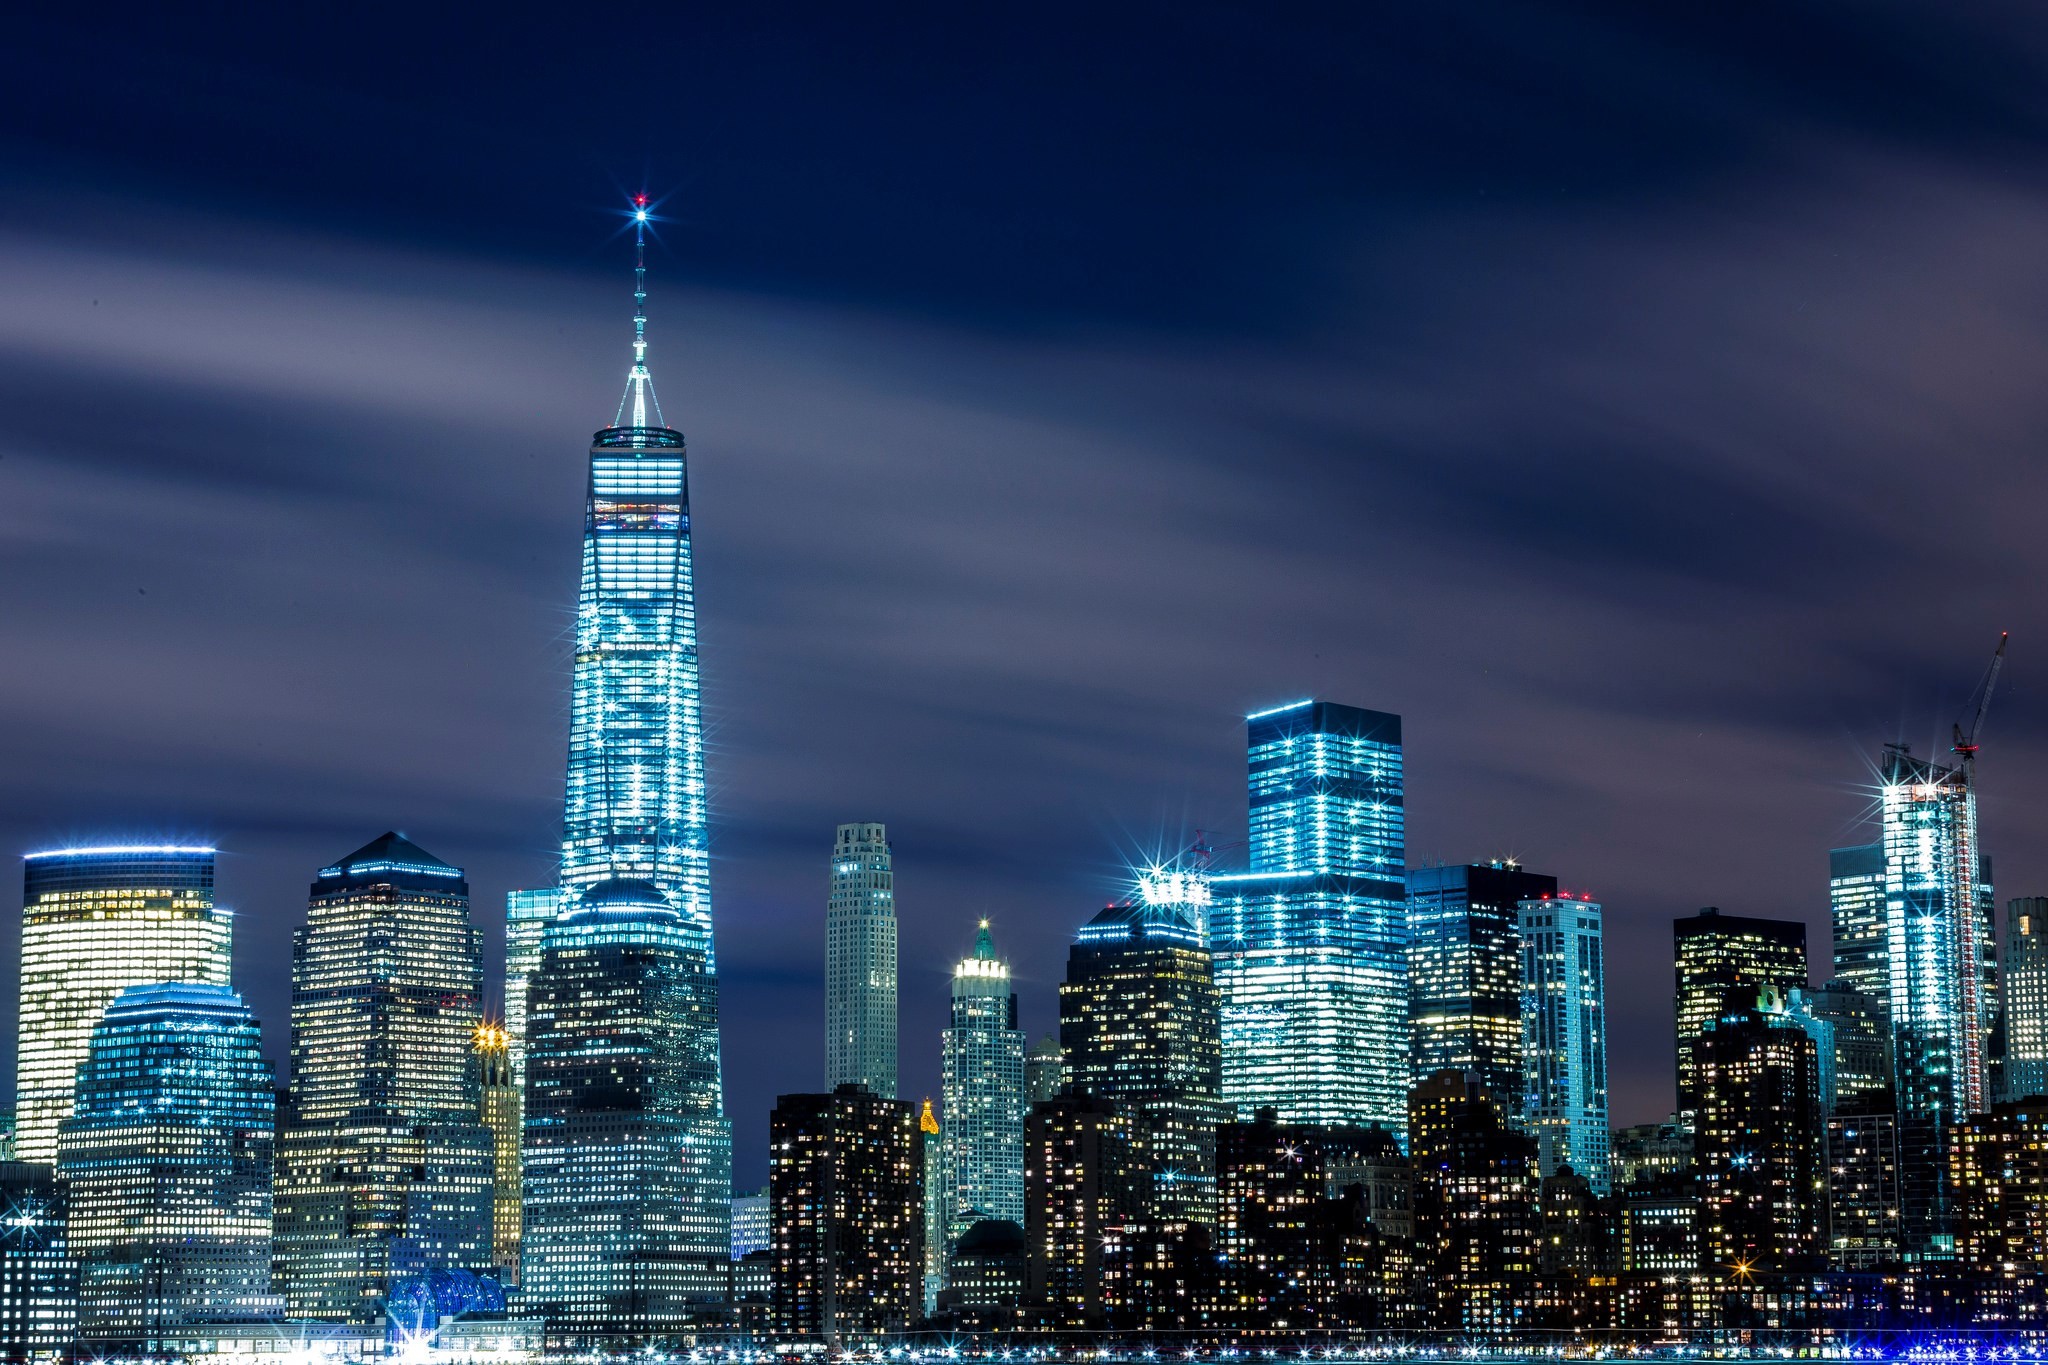 2048x1365 free desktop backgrounds for one world trade center by Gaines Chester  (2017-03-19)